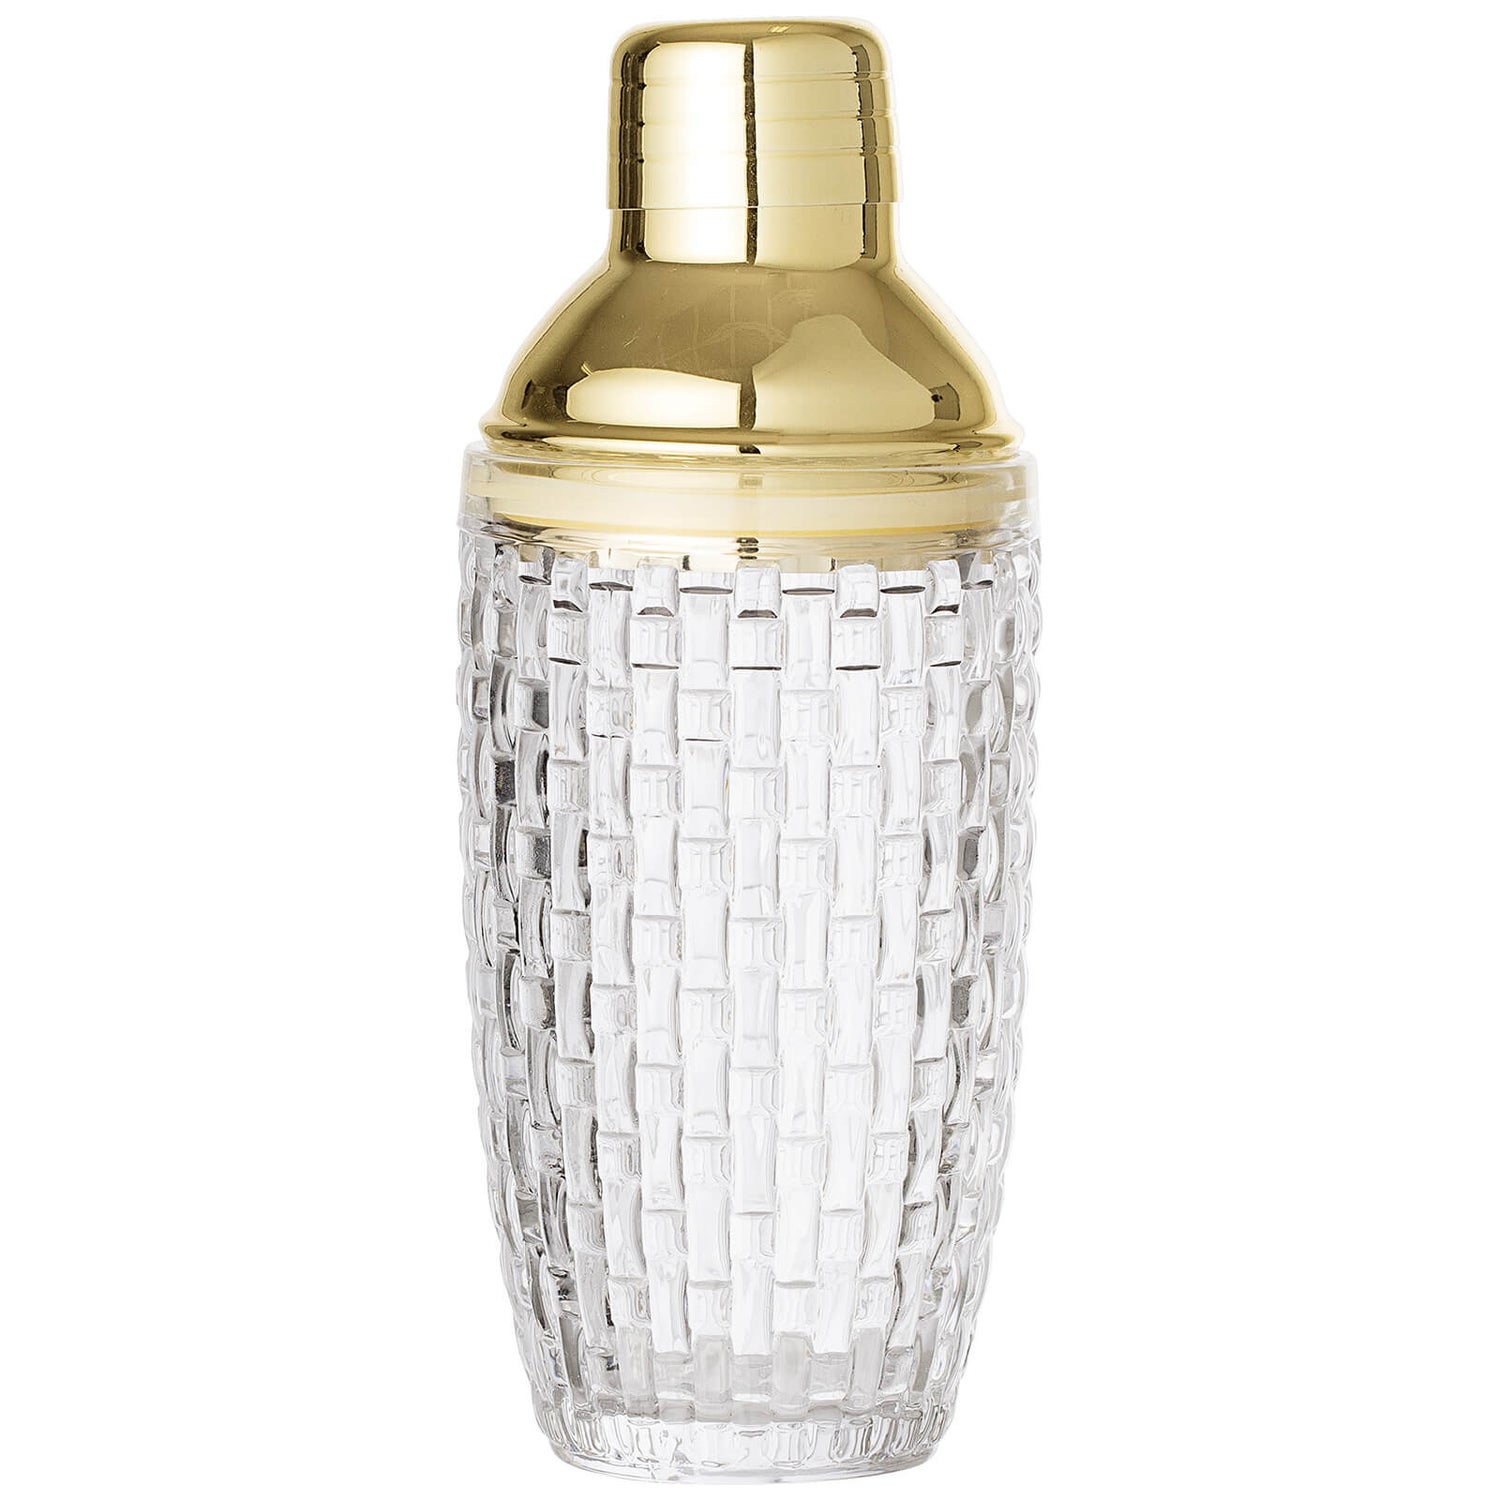 Bloomingville Cocktail Shaker - Gold